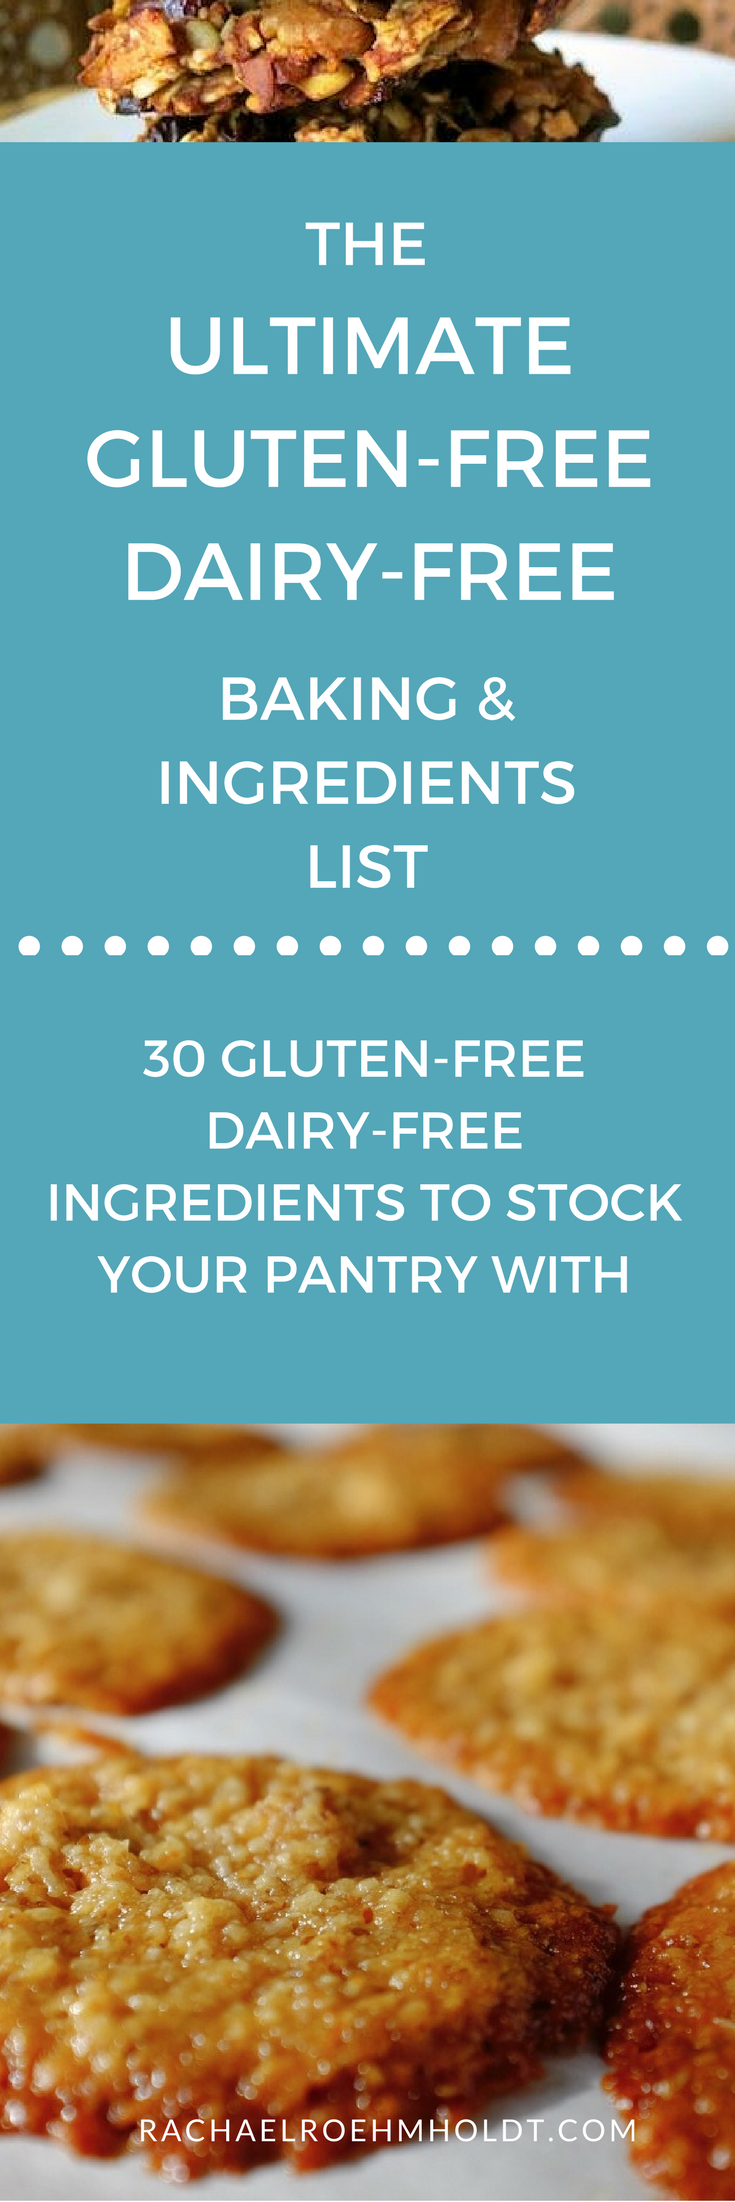 Getting started with gluten-free dairy-free baking? Check out this list of 30 ingredients to keep on hand for gluten-free dairy-free desserts, breads, and cake recipes.